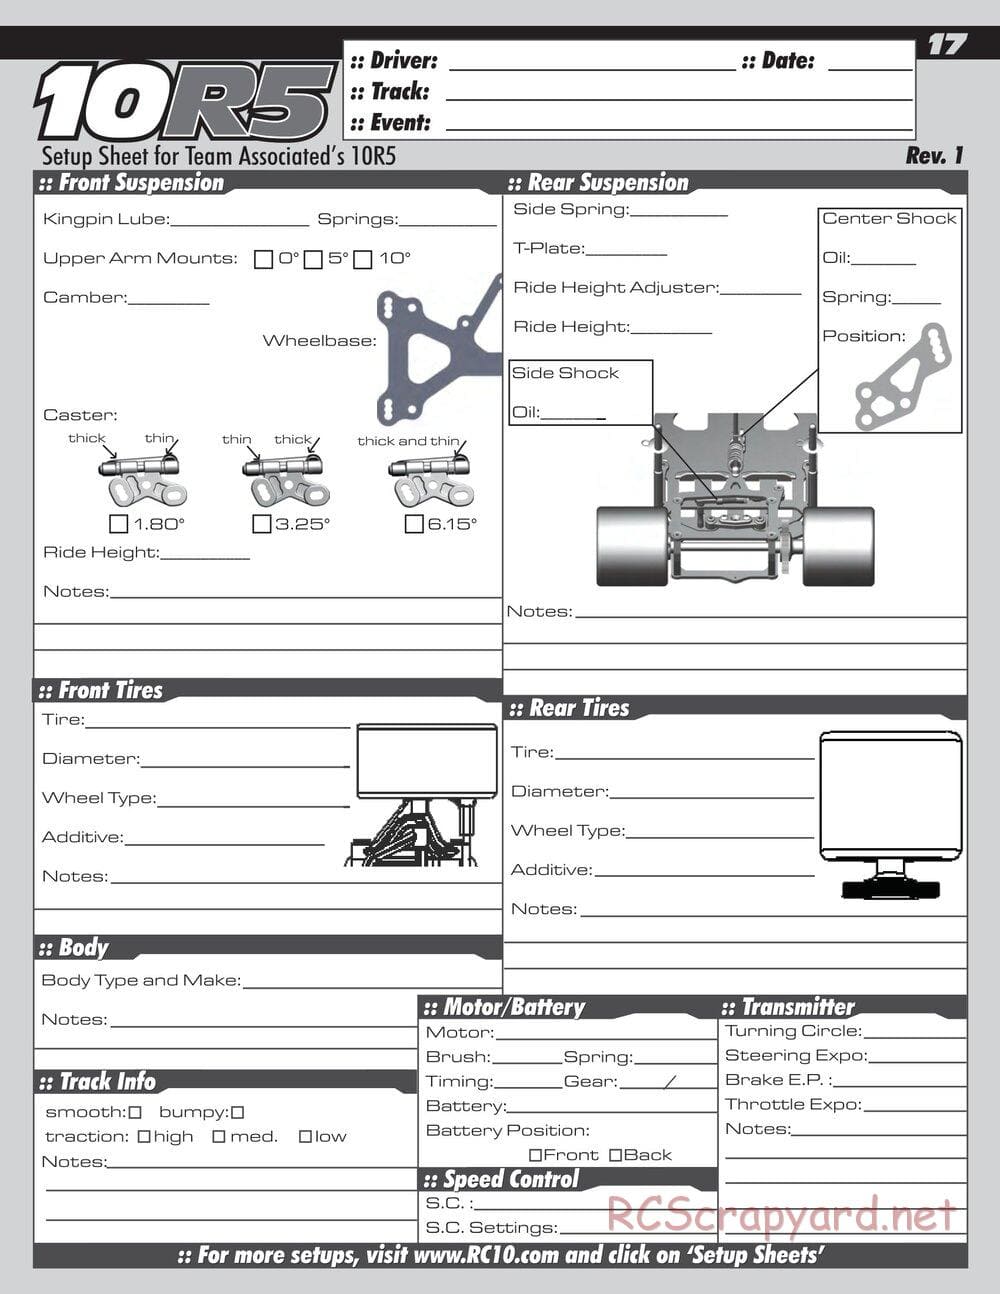 Team Associated - RC10R5 Factory Team - Manual - Page 17